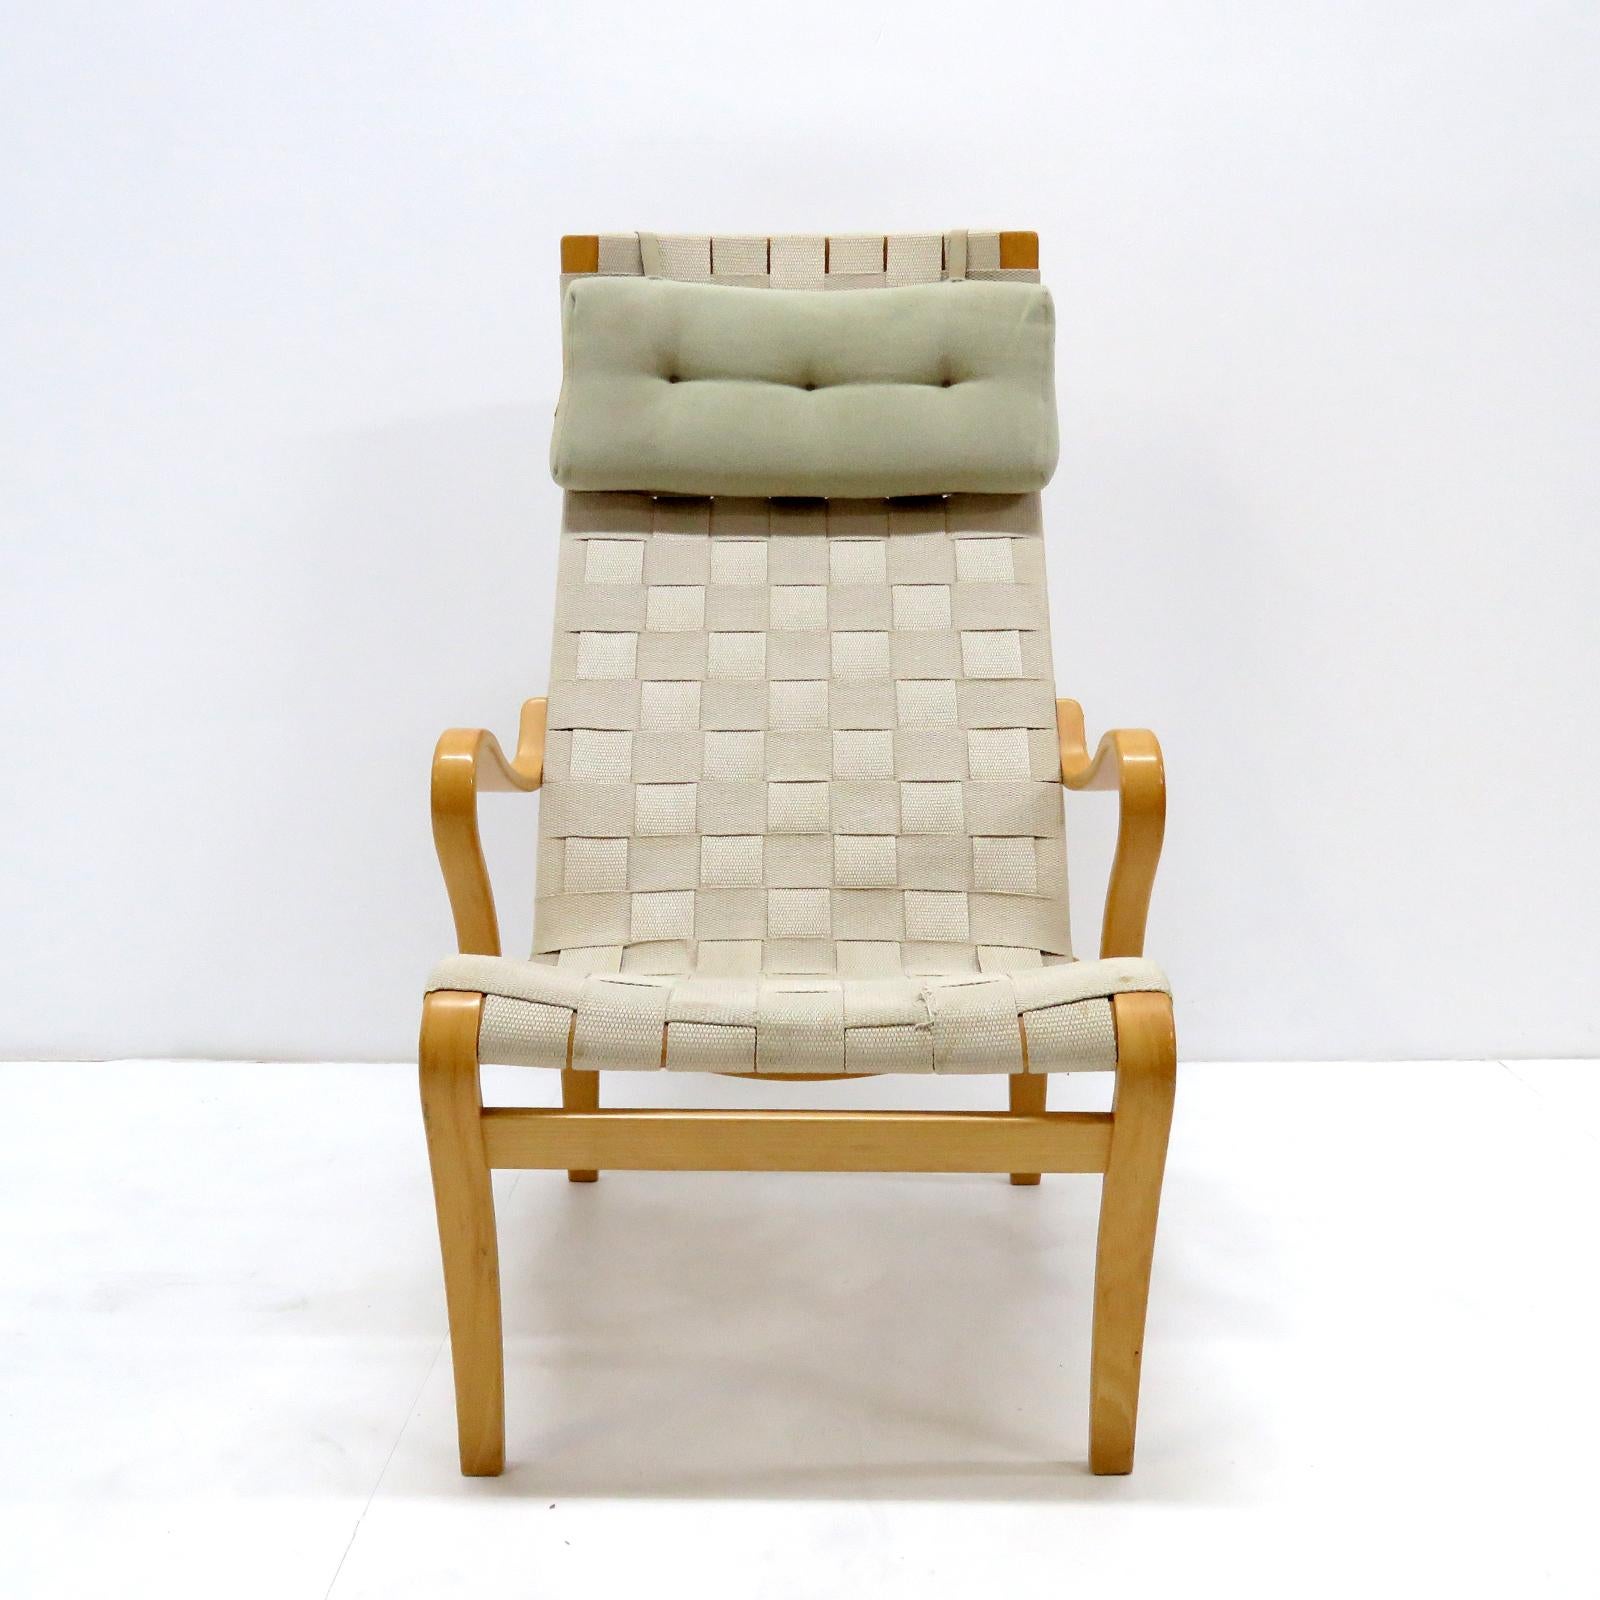 Wonderful early curvilinear lounge chair 'Miranda' by Bruno Mathsson Design Studio, composed of hemp webbing on a molded beech plywood frame with adjustable headrest on leather straps, stamped.